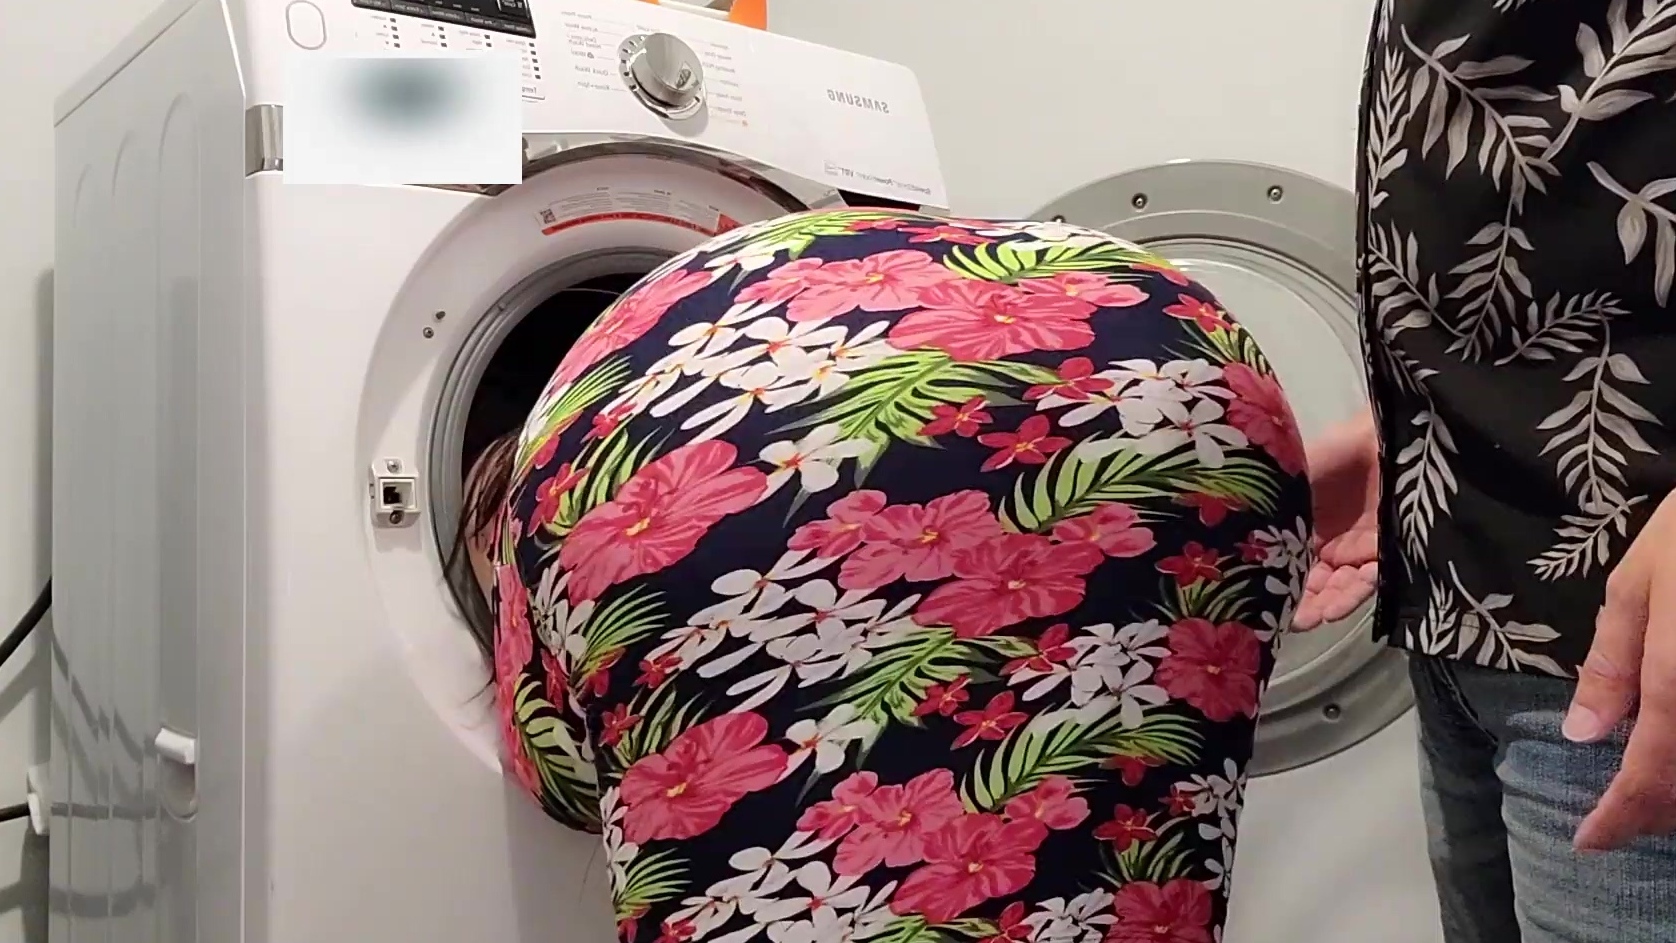 Brazzer Washer Com - Bitch with huge Ass stuck in washing machine! Perv stepson sprayed cum all  over her Ass